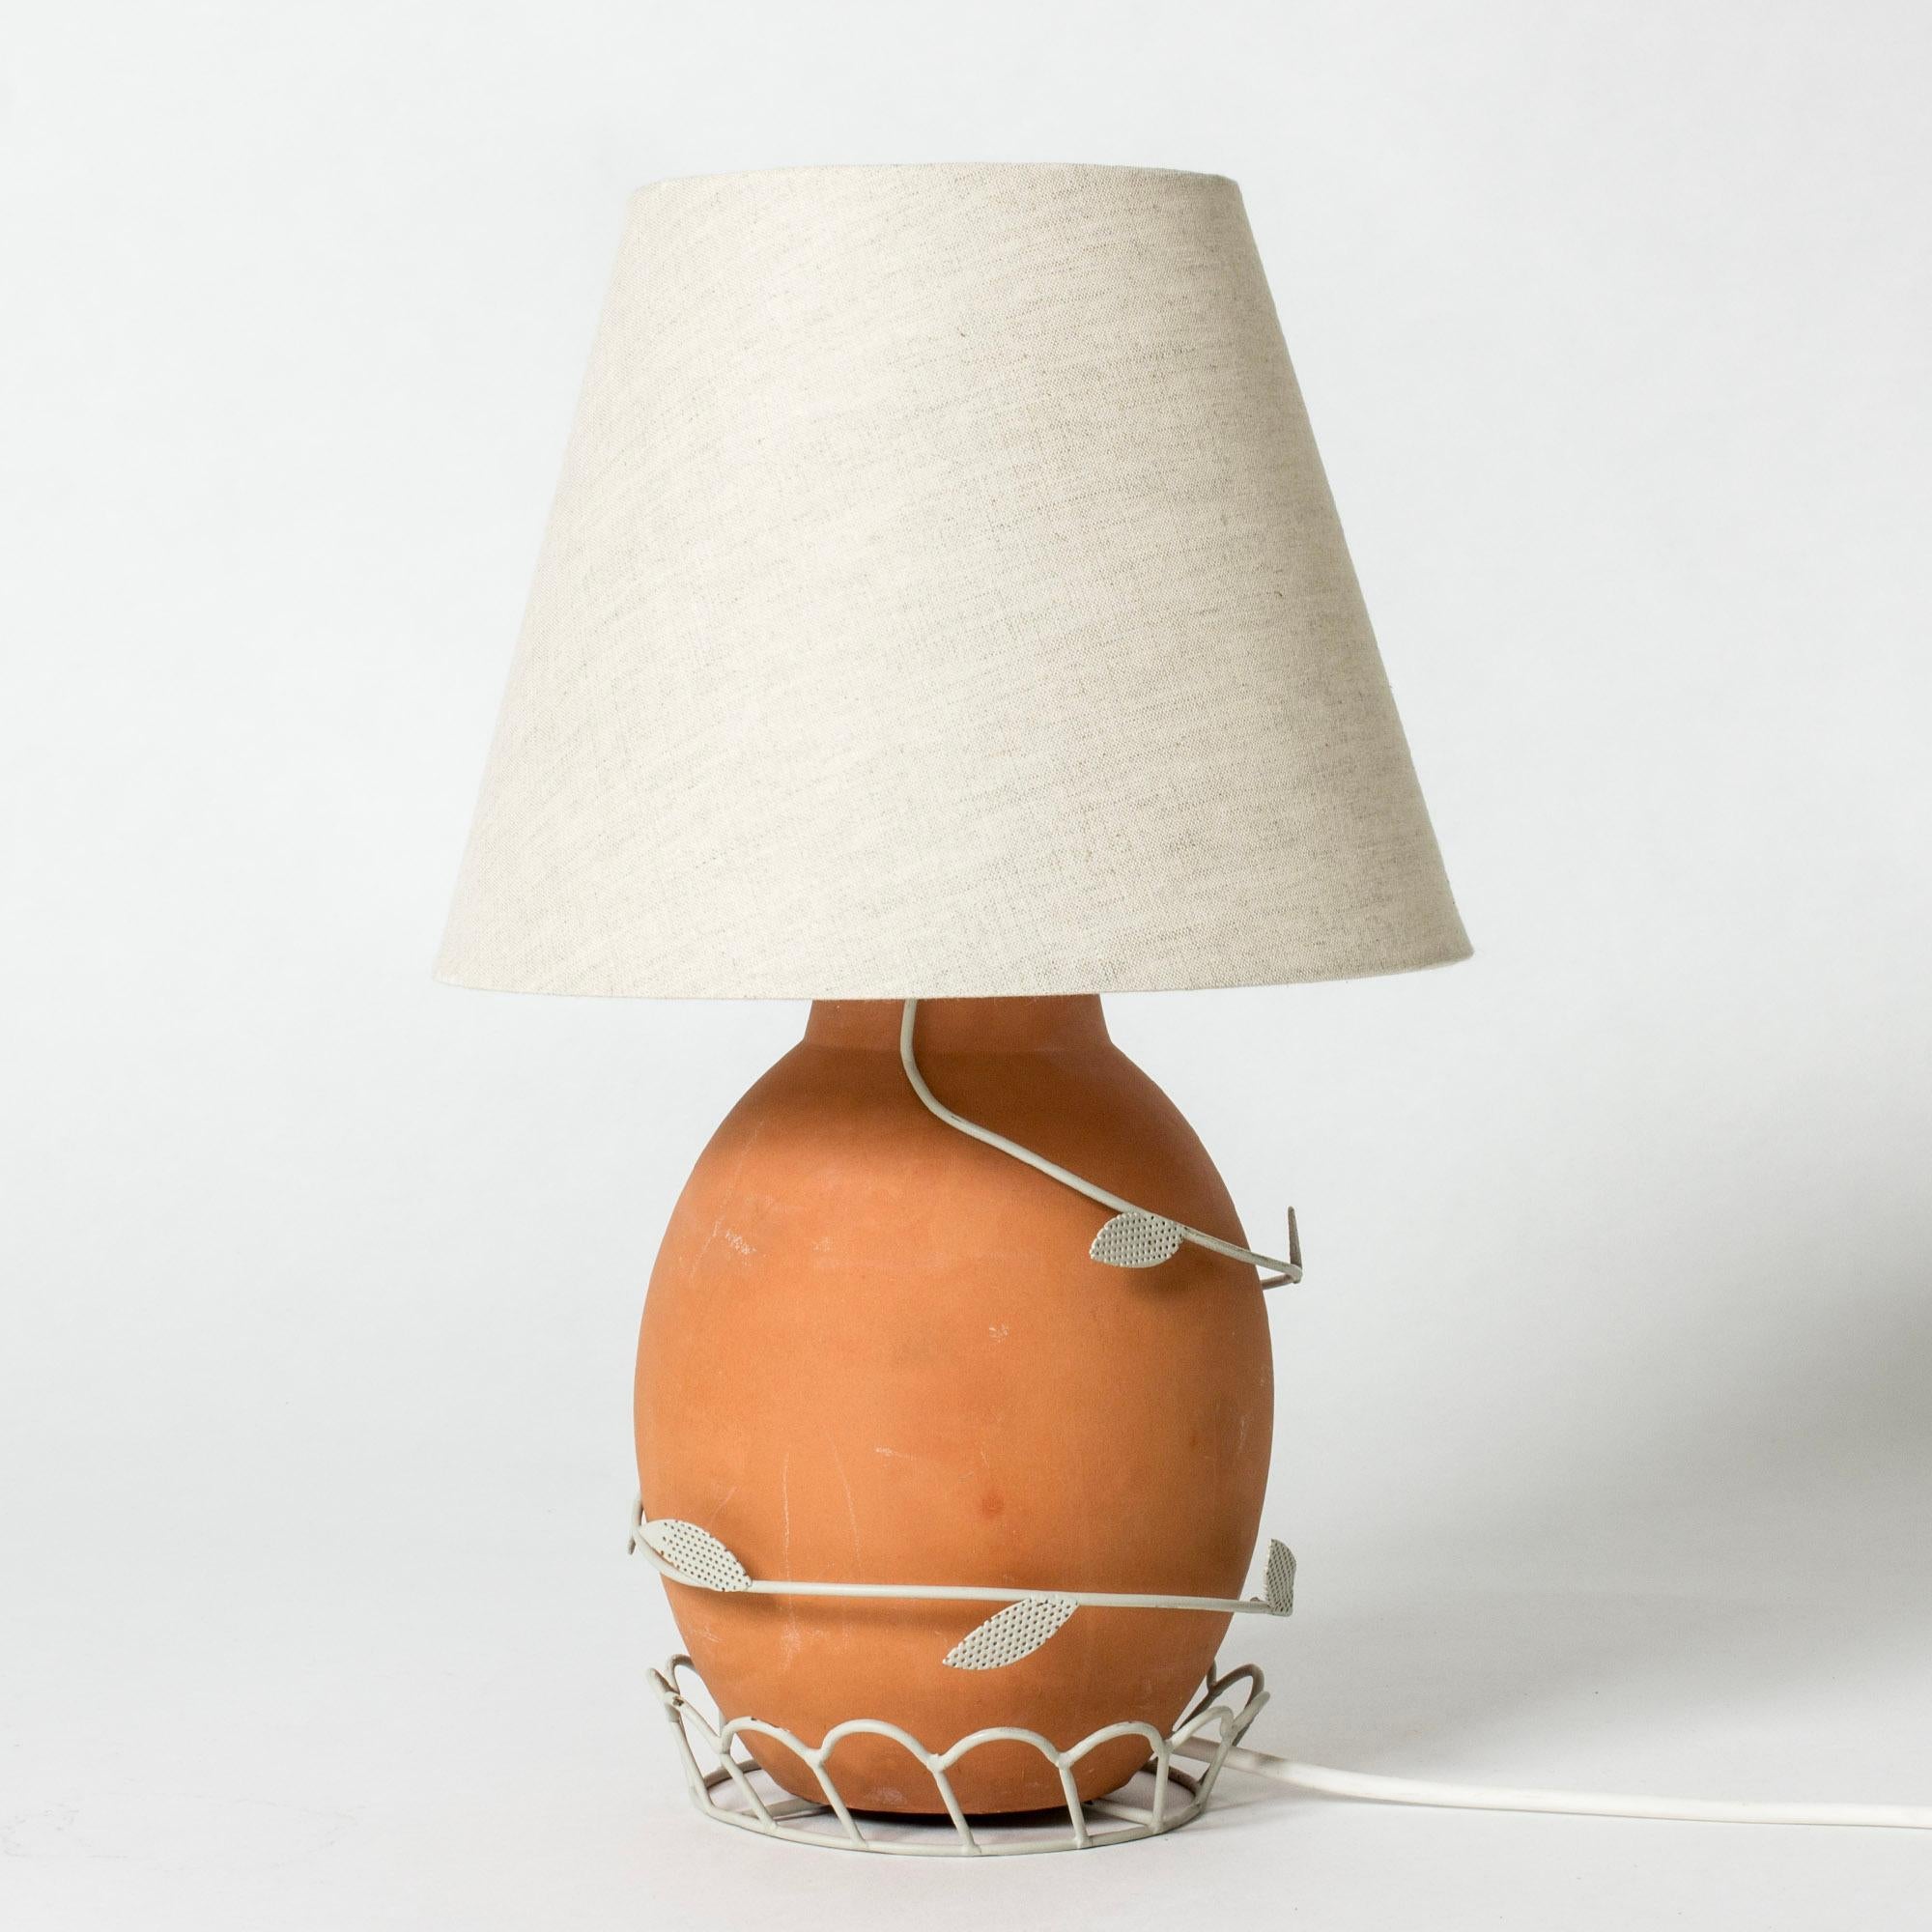 Lovely table lamp from Corona Belysningskultur, with a terracotta base. Decor of a white lacquered frame enveloping the base, with a scalloped pattern and leaves.